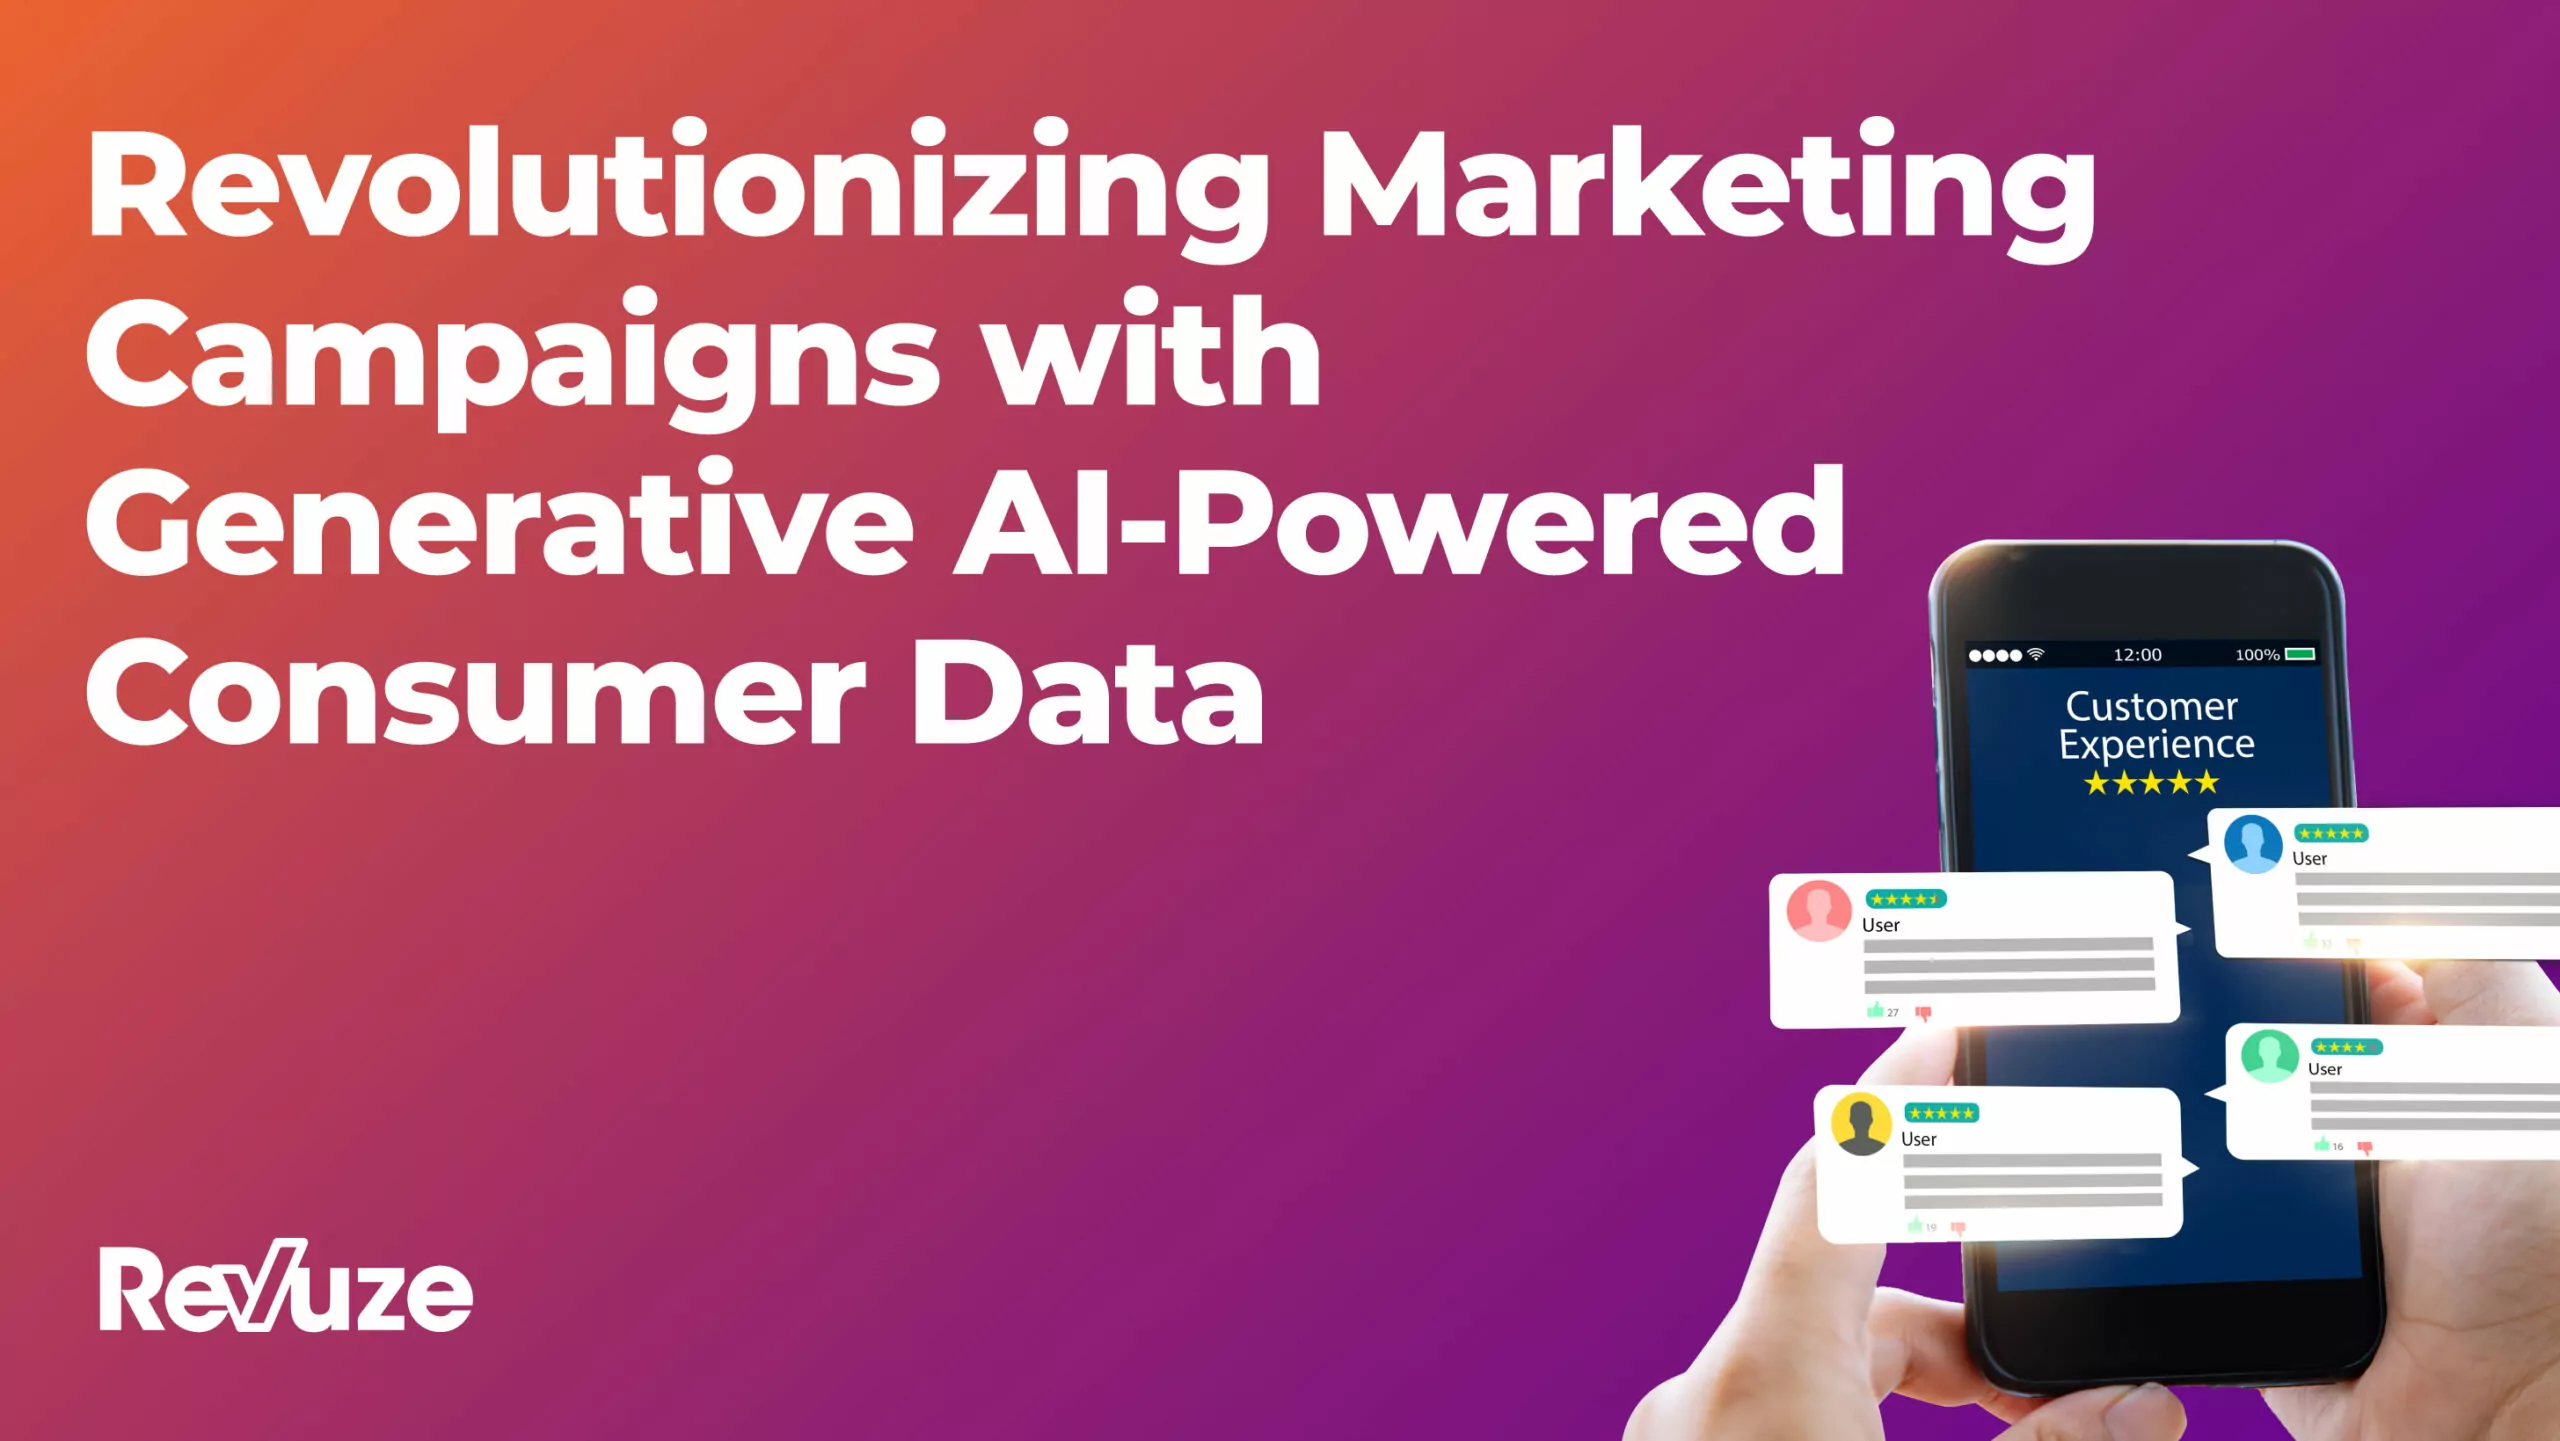 Revolutionizing Marketing Campaigns with Generative AI-Powered Consumer Insights